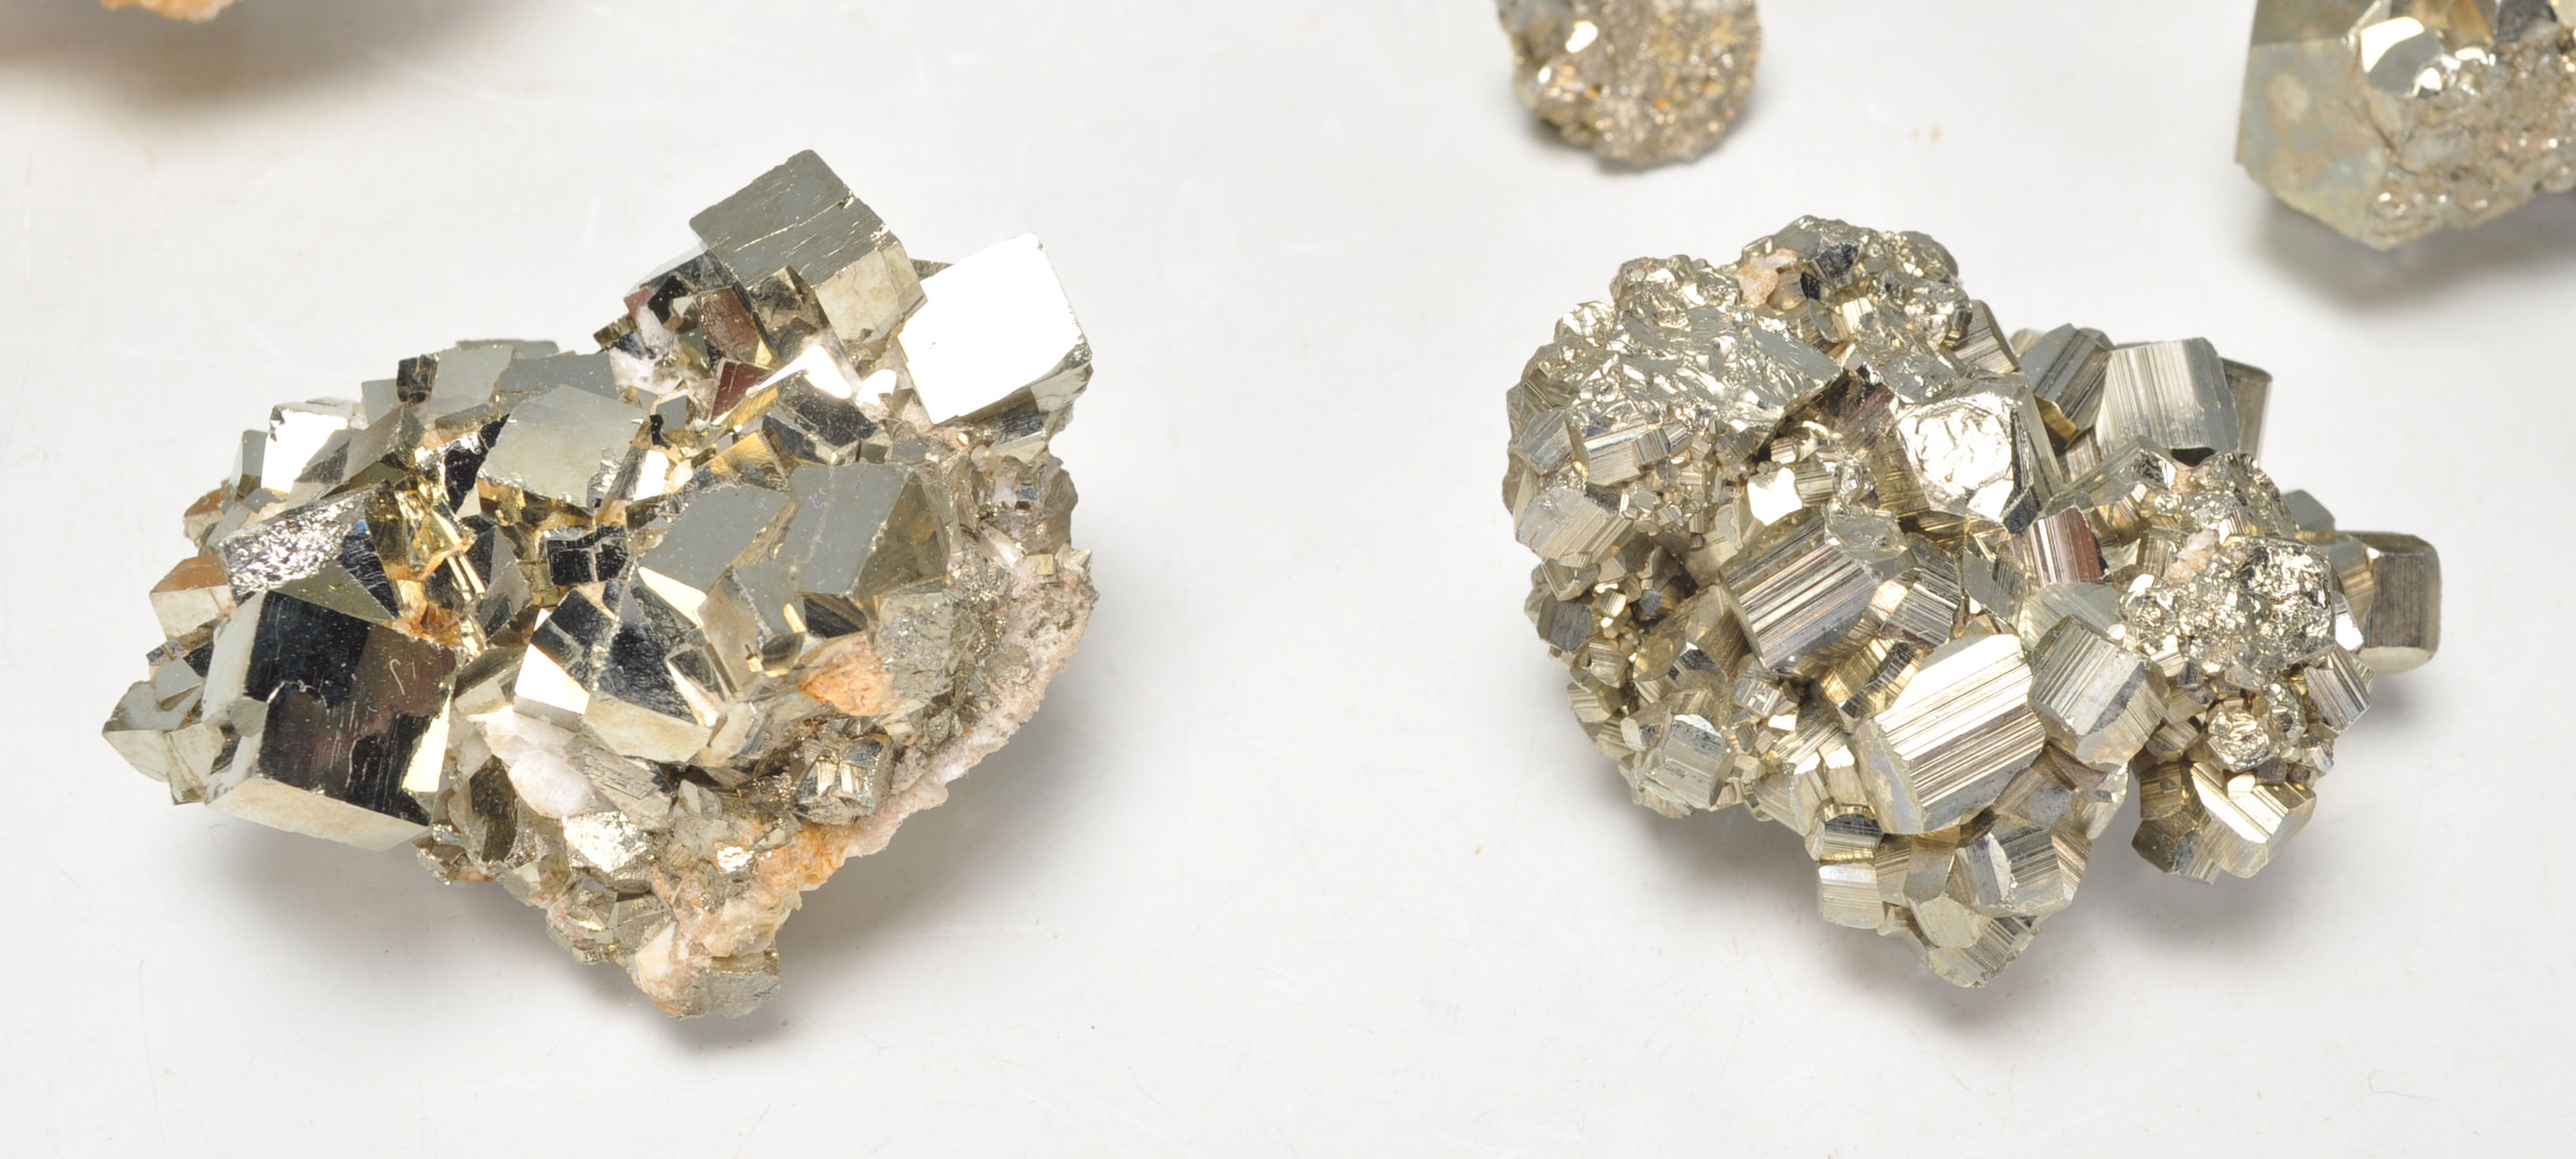 A large collection of pyrite crystal cube clusters / fools gold / rock / fossils / minerals - Image 3 of 8